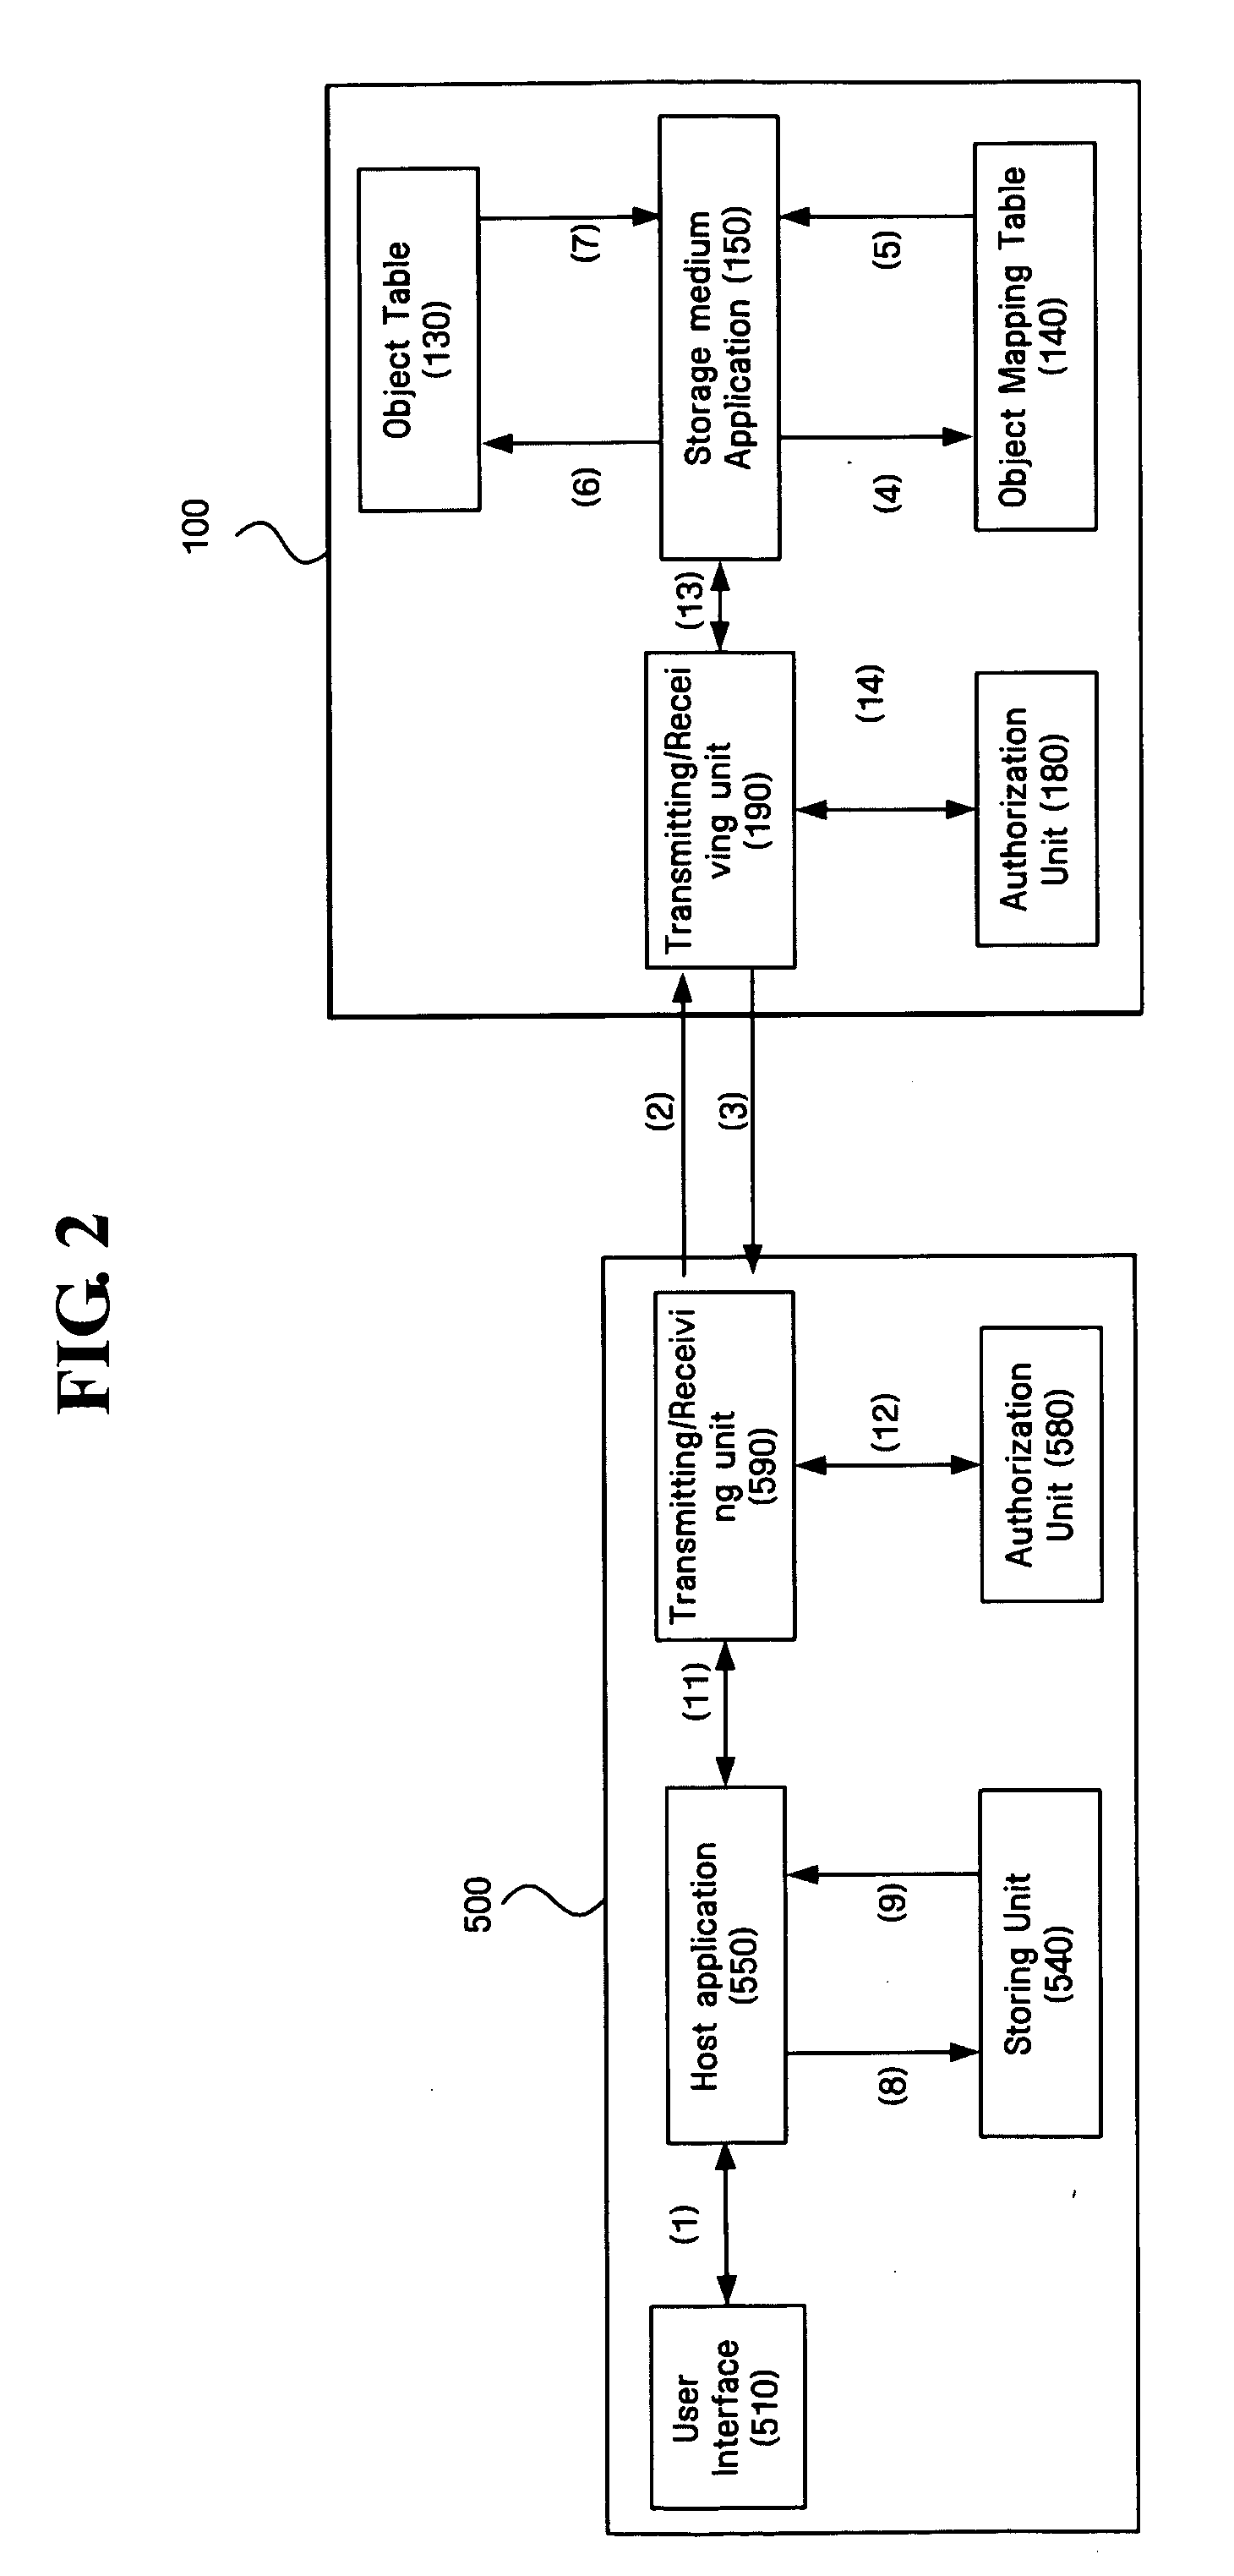 Method and apparatus for searching rights objects stored in portable storage device using object location data